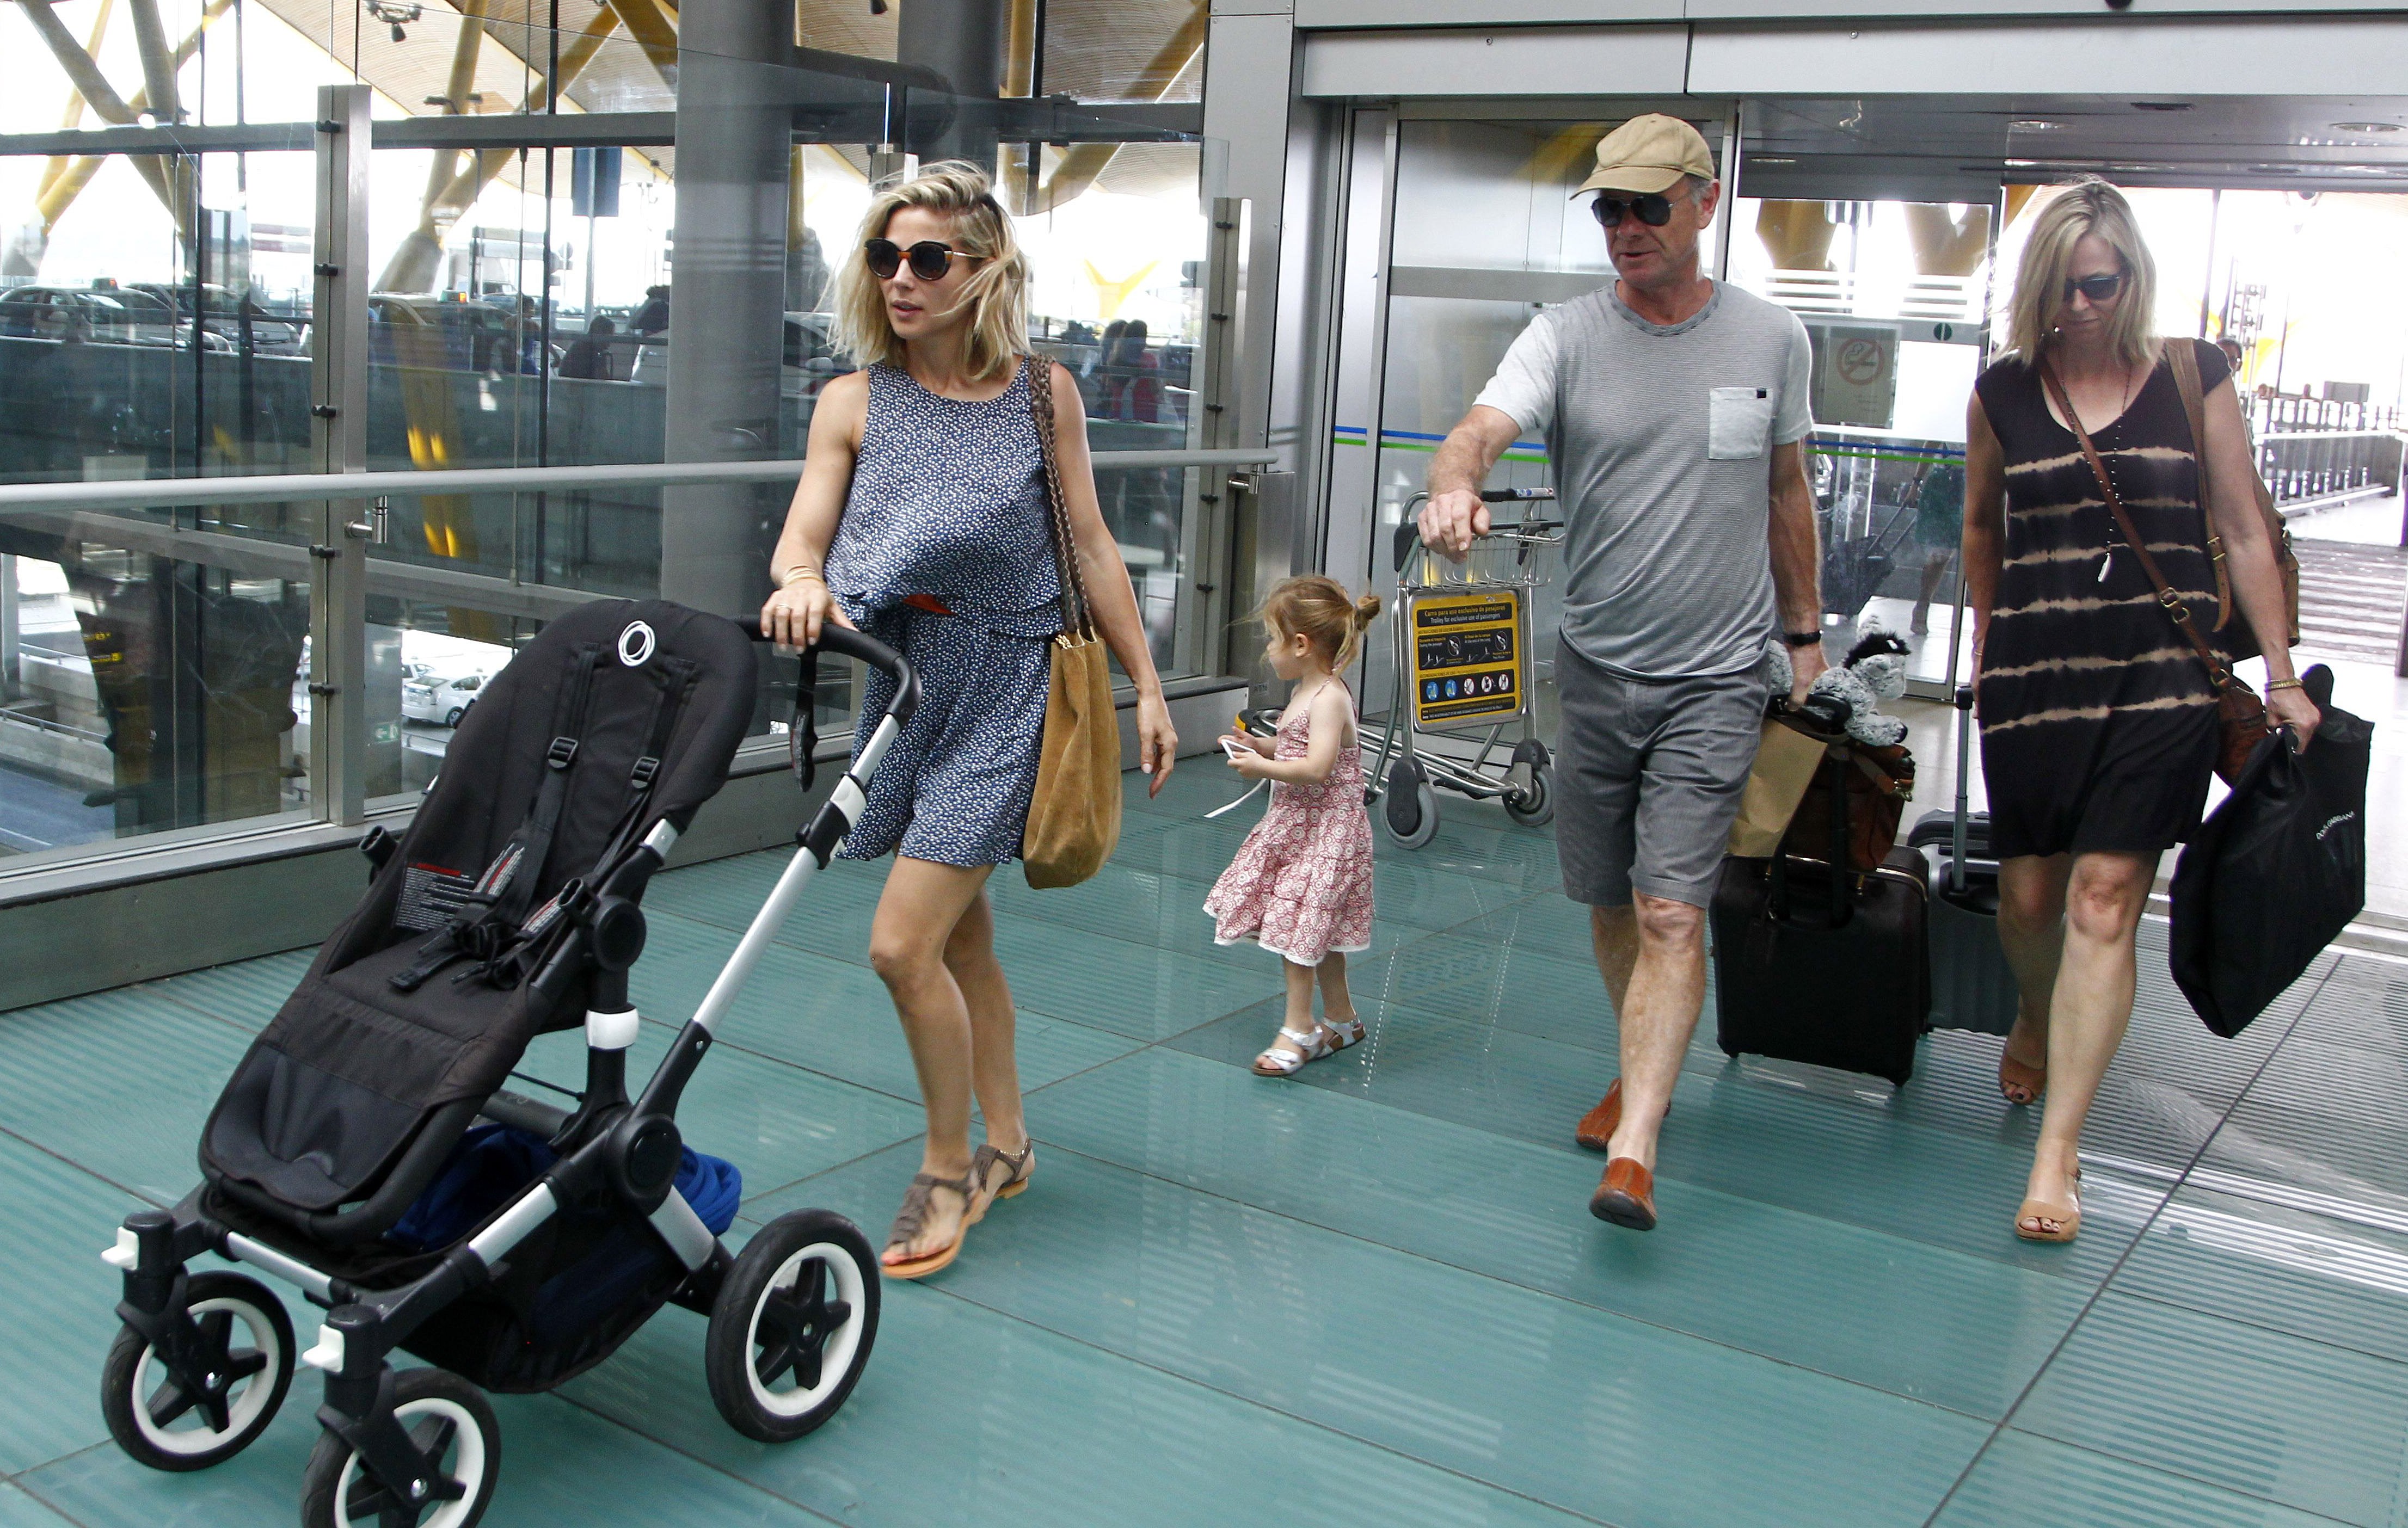  Elsa Pataky (L), her daughter Indian Rose Hemsworth, her father-in-law Craig Hemsworth and her mother-in-law Leonie Hemsworth (R) are seen on July 7, 2015, in Madrid, Spain. | Source: Getty Images